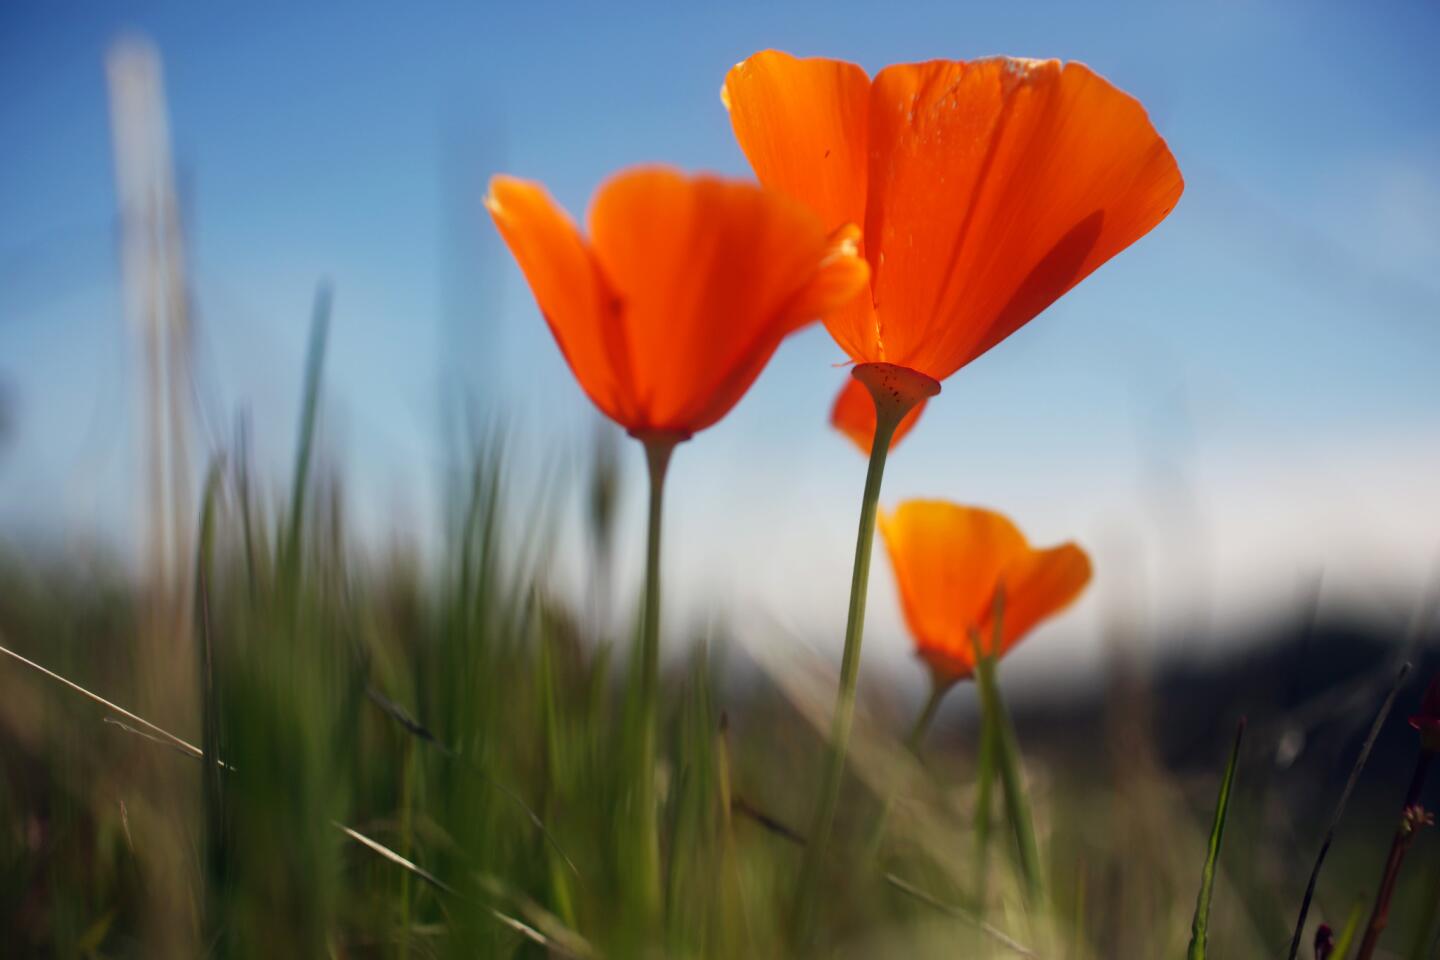 Poppies were in bloom along Don Mullally Trail in Newhall's Ed Davis Park in early March. The park is tucked into Towsley Canyon.